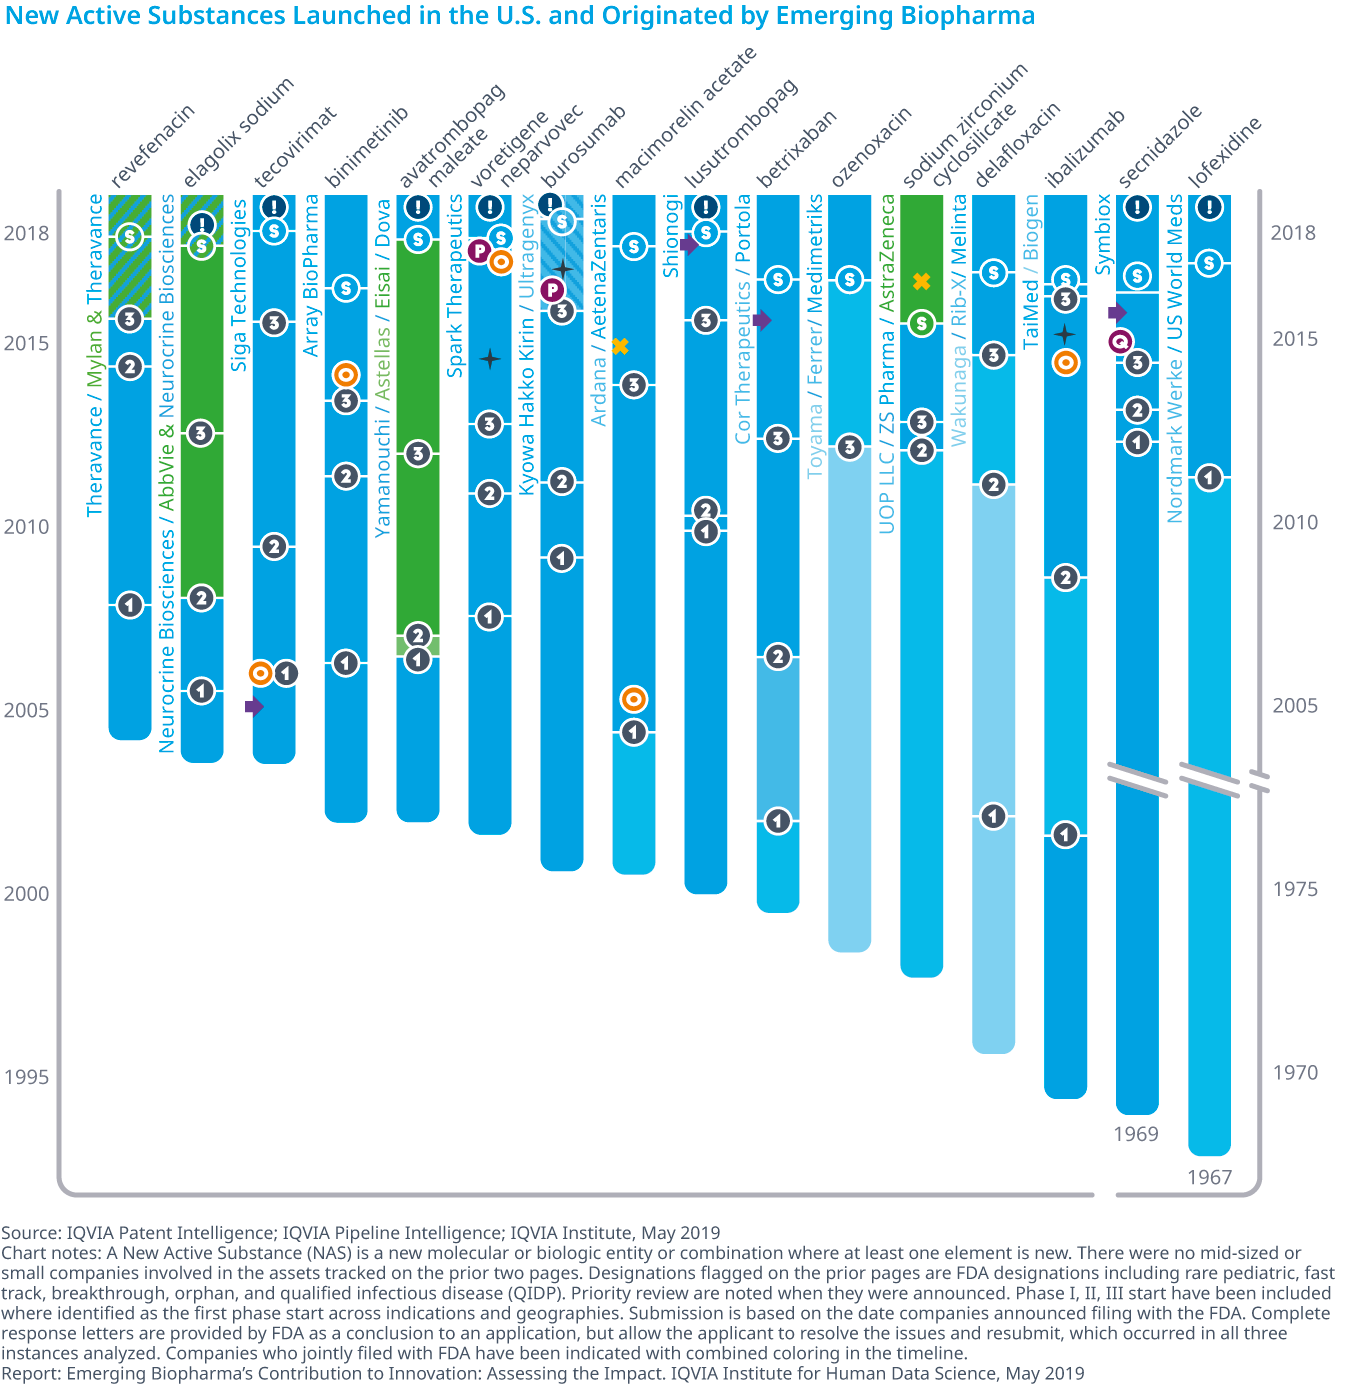 Chart 16B: New Active Substances Launched in the U.S. and Originated by Emerging Biopharma